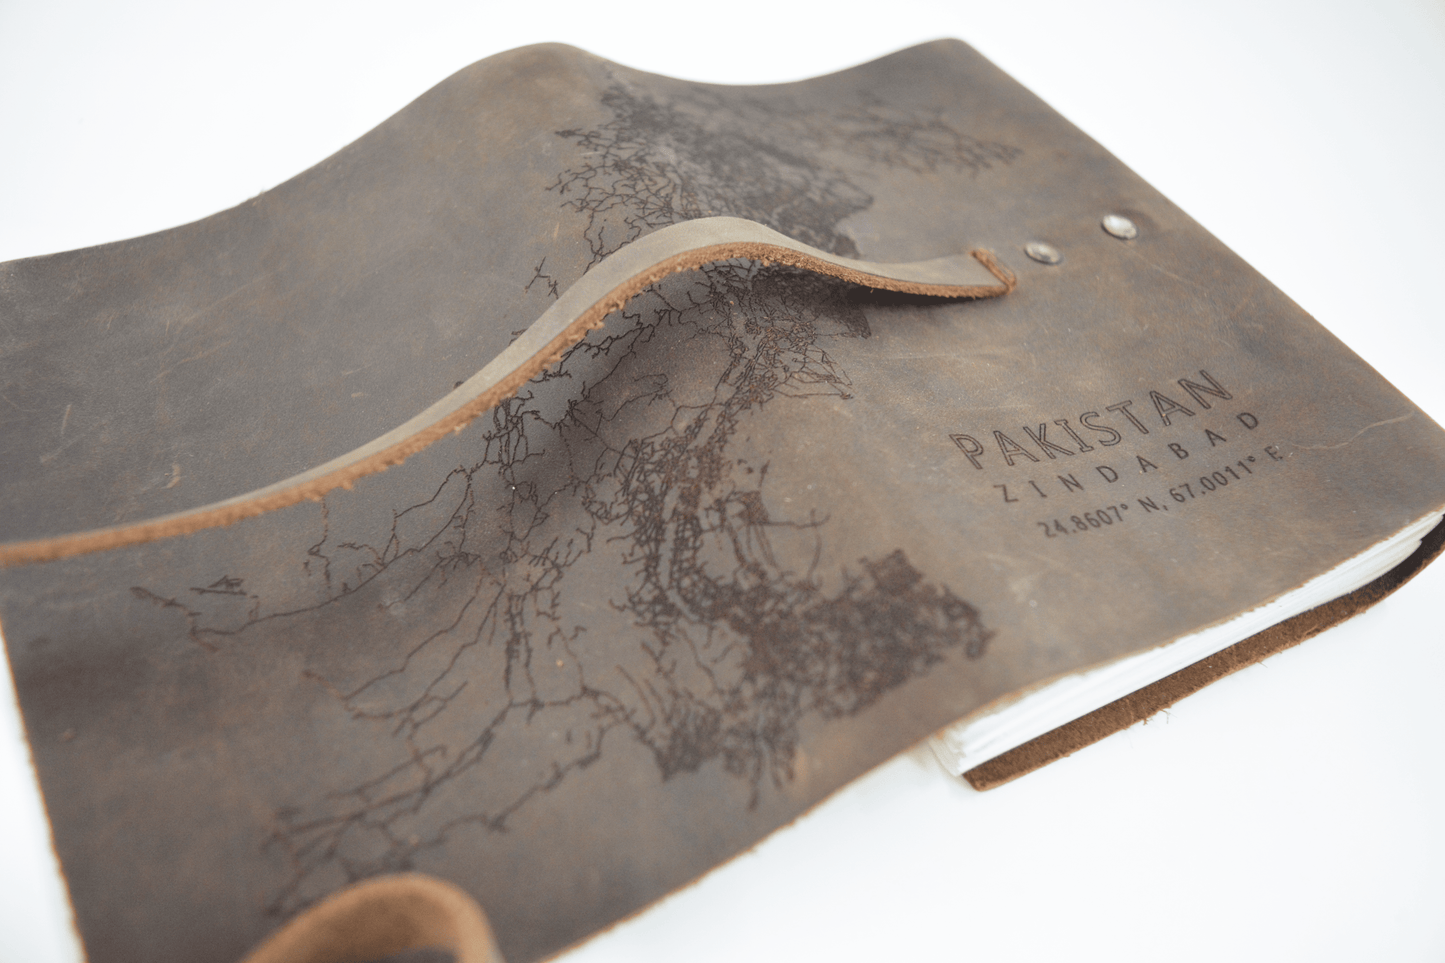 Pakistan - Mapped Leather Journal